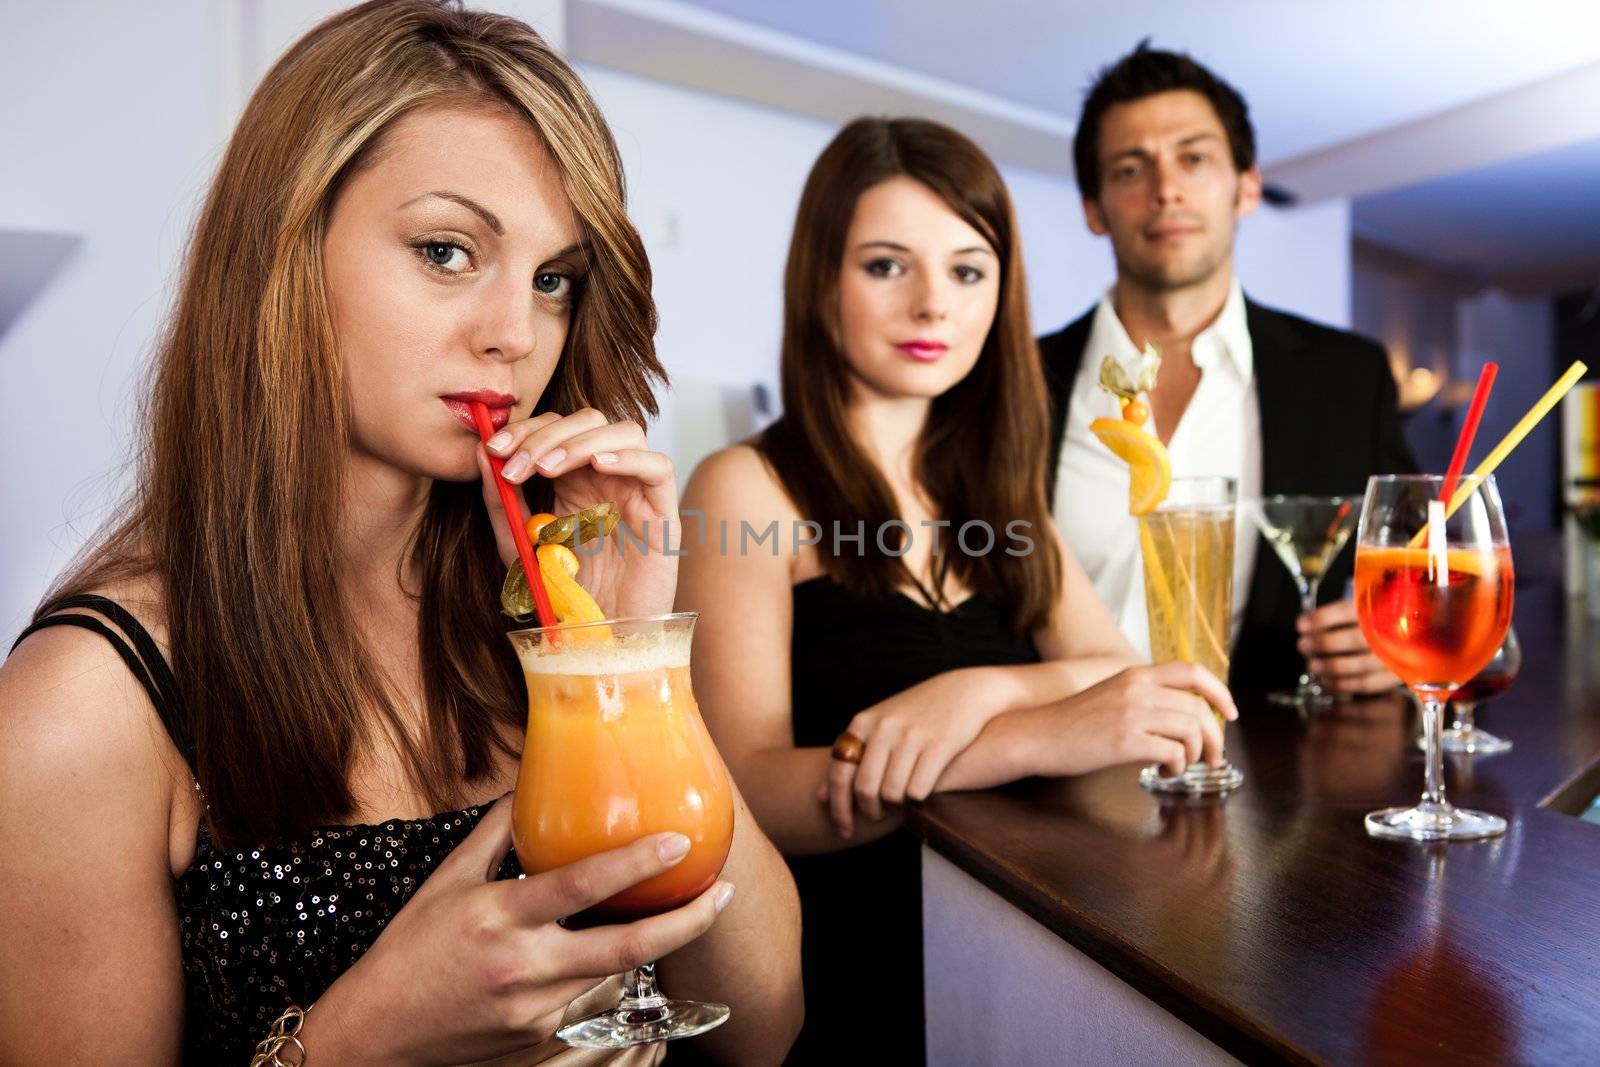 Beautiful women with friends at the bar. Drinking tequila sunrise